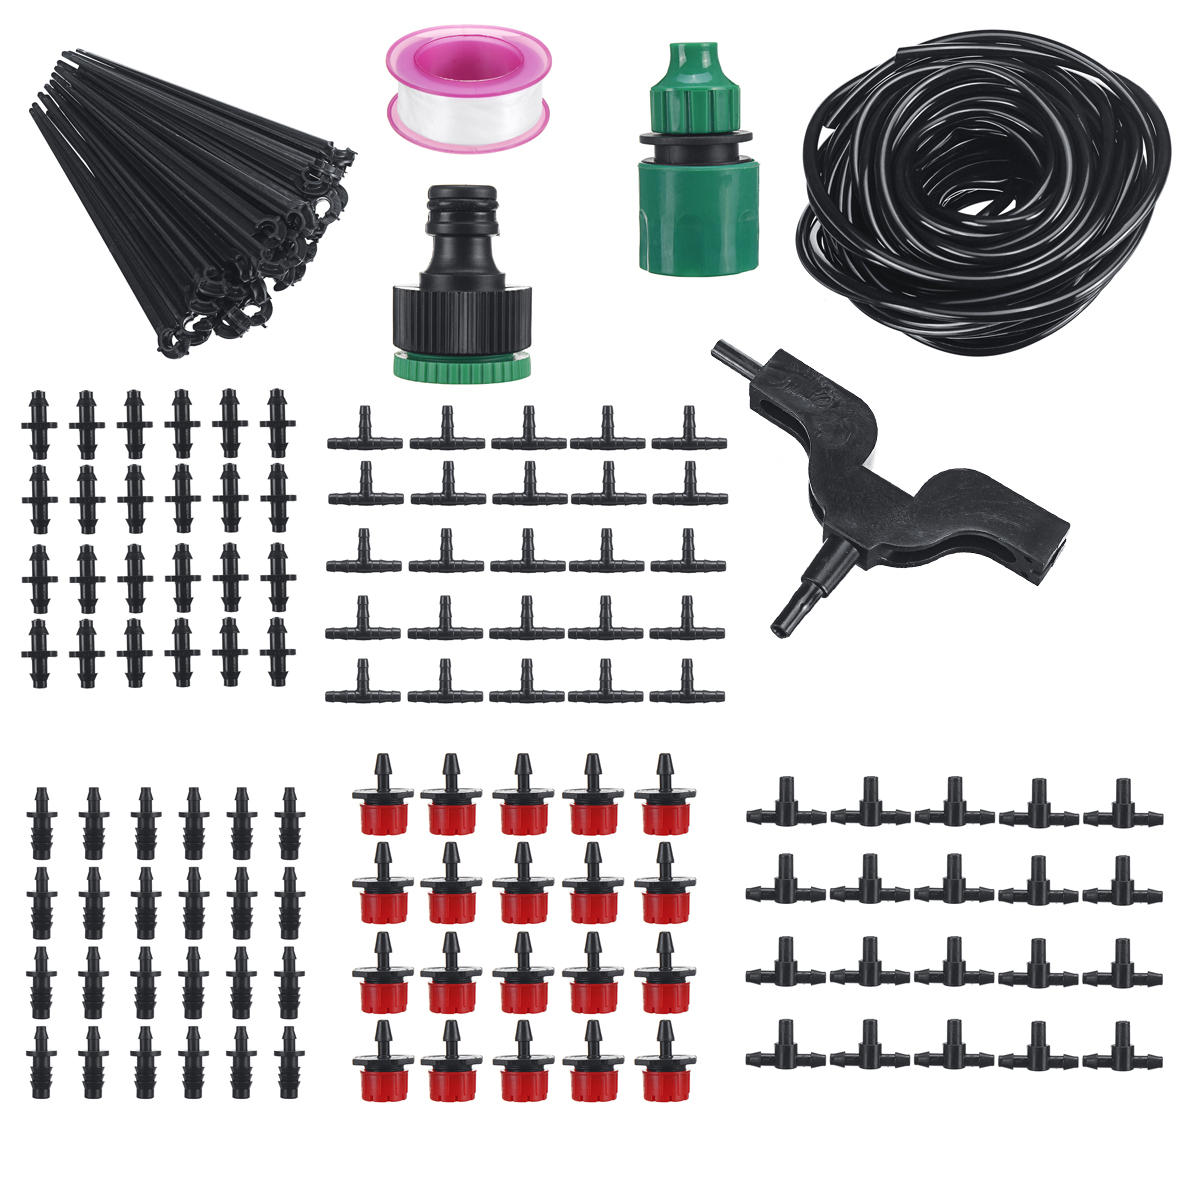 10/20/25M Auto Timer Water Drip Irrigation System Kits Self Watering for Garden Plant